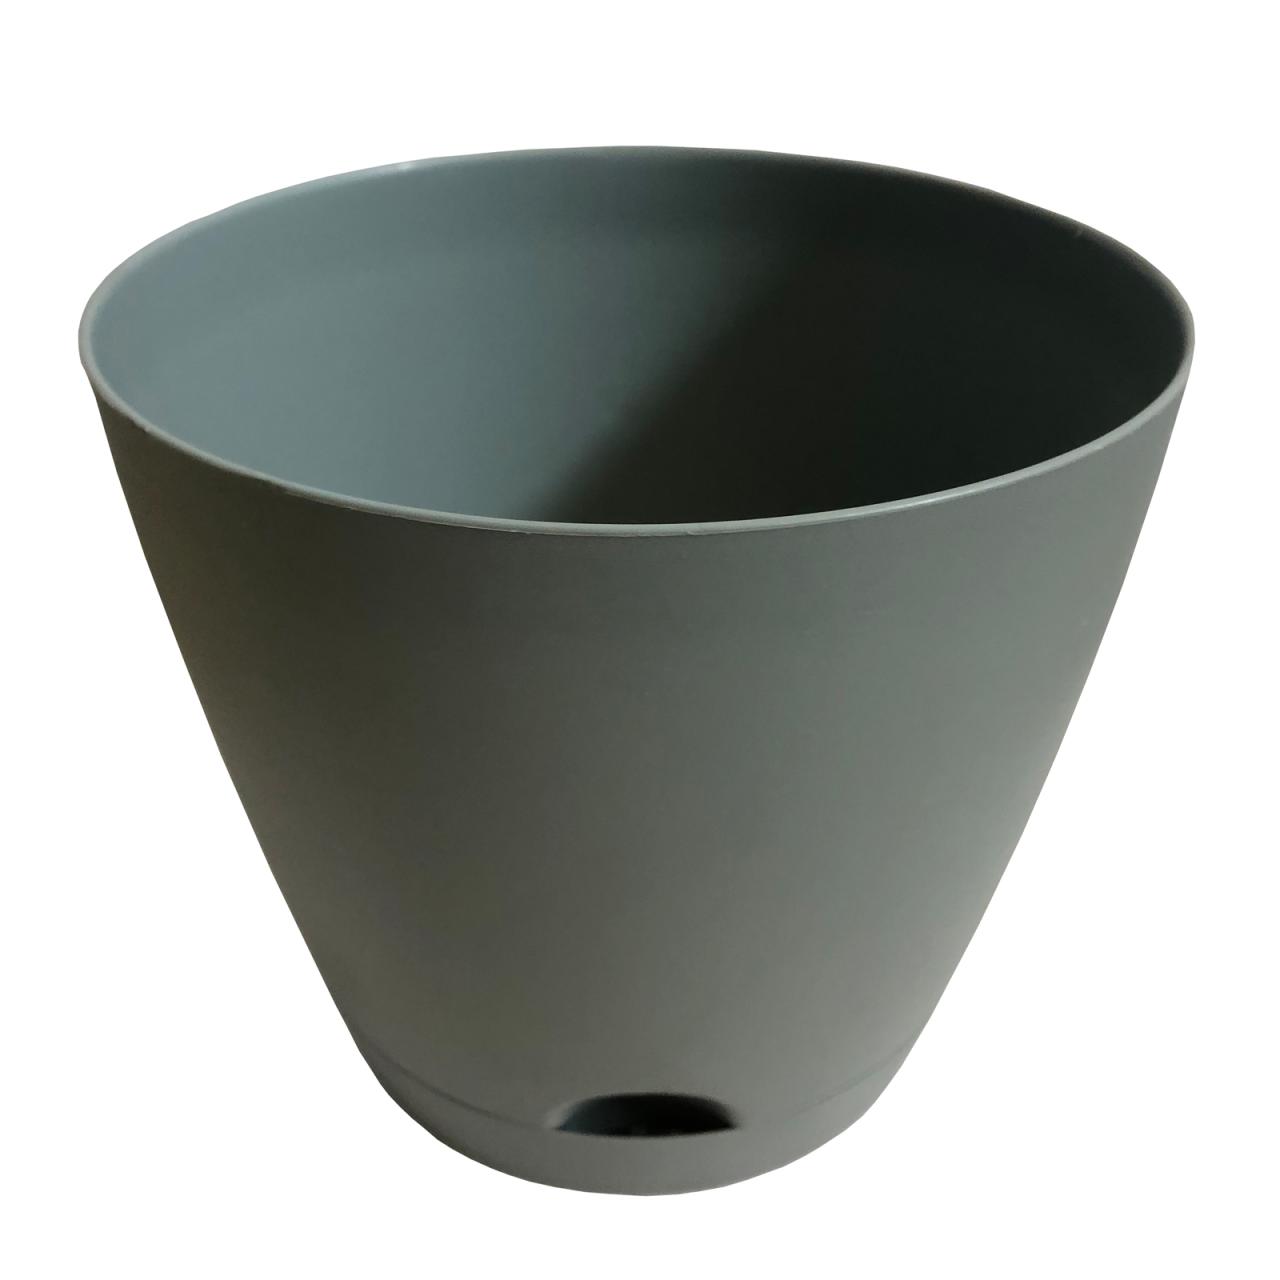 Hanging Plants Indoor | Bunnings Eden Pots: Enhancing Gardens with Style and Functionality